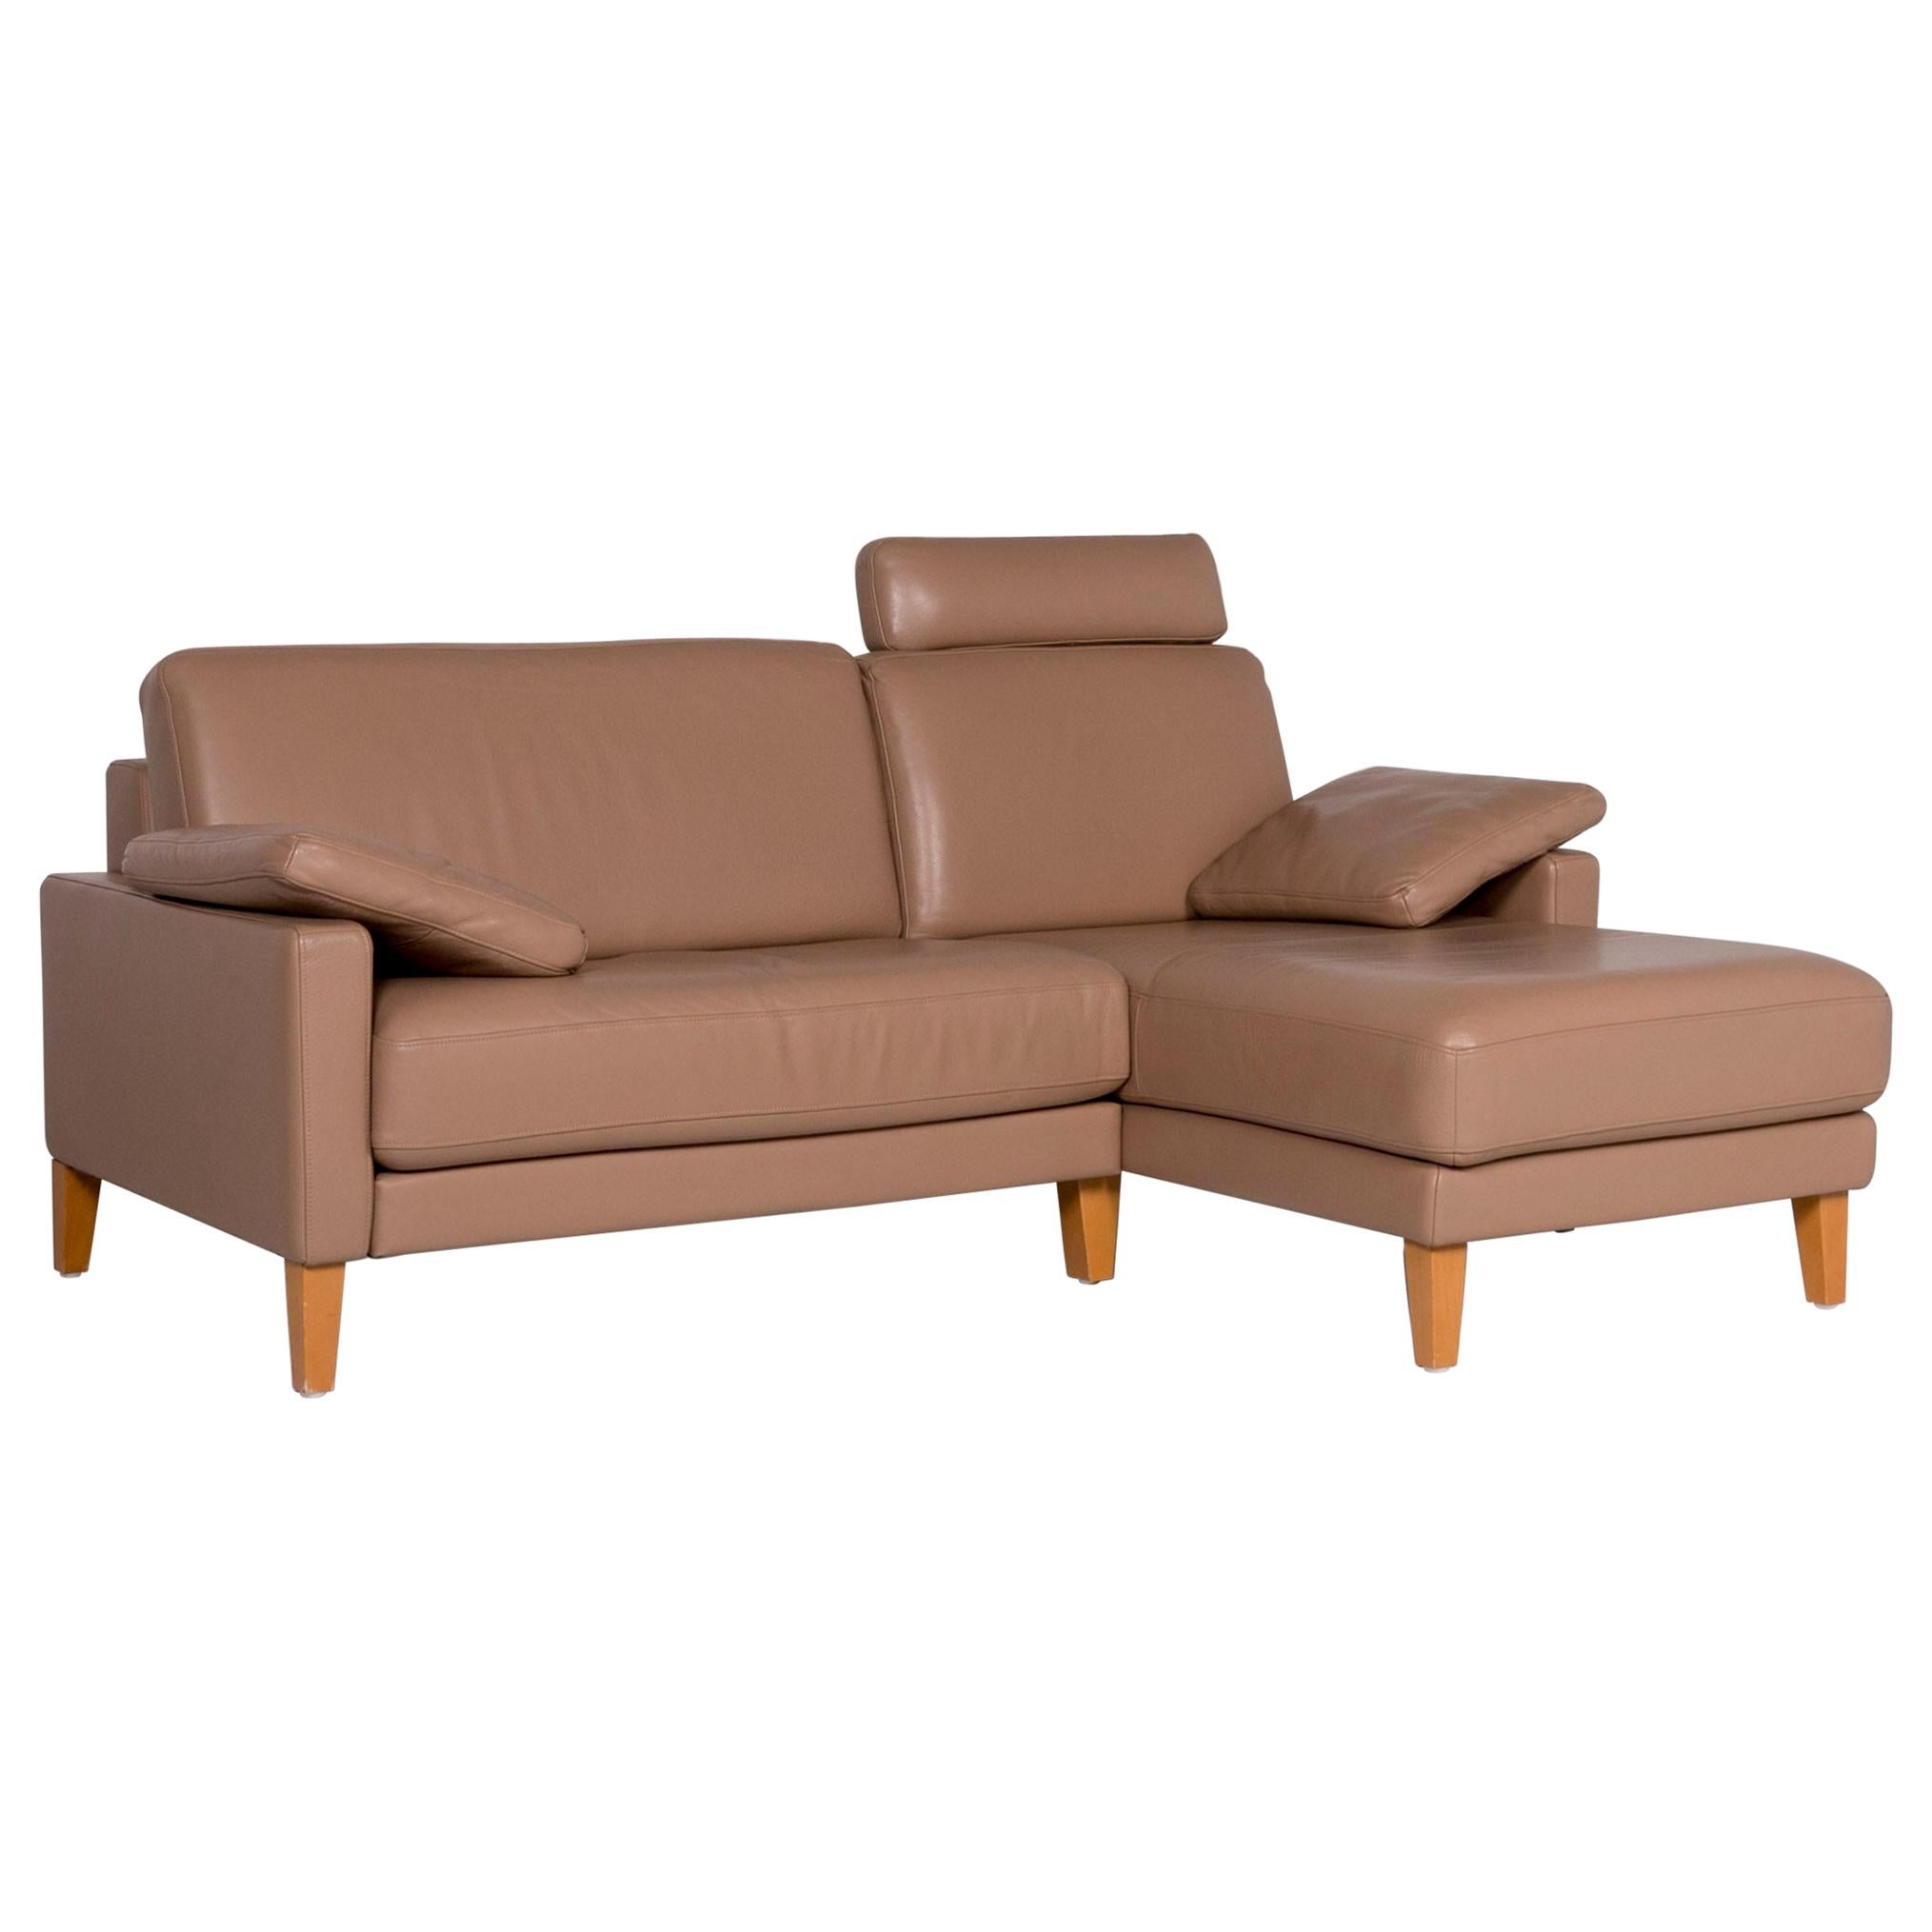 Rolf Benz Leather Corner Sofa Brown Sofa Couch For Sale